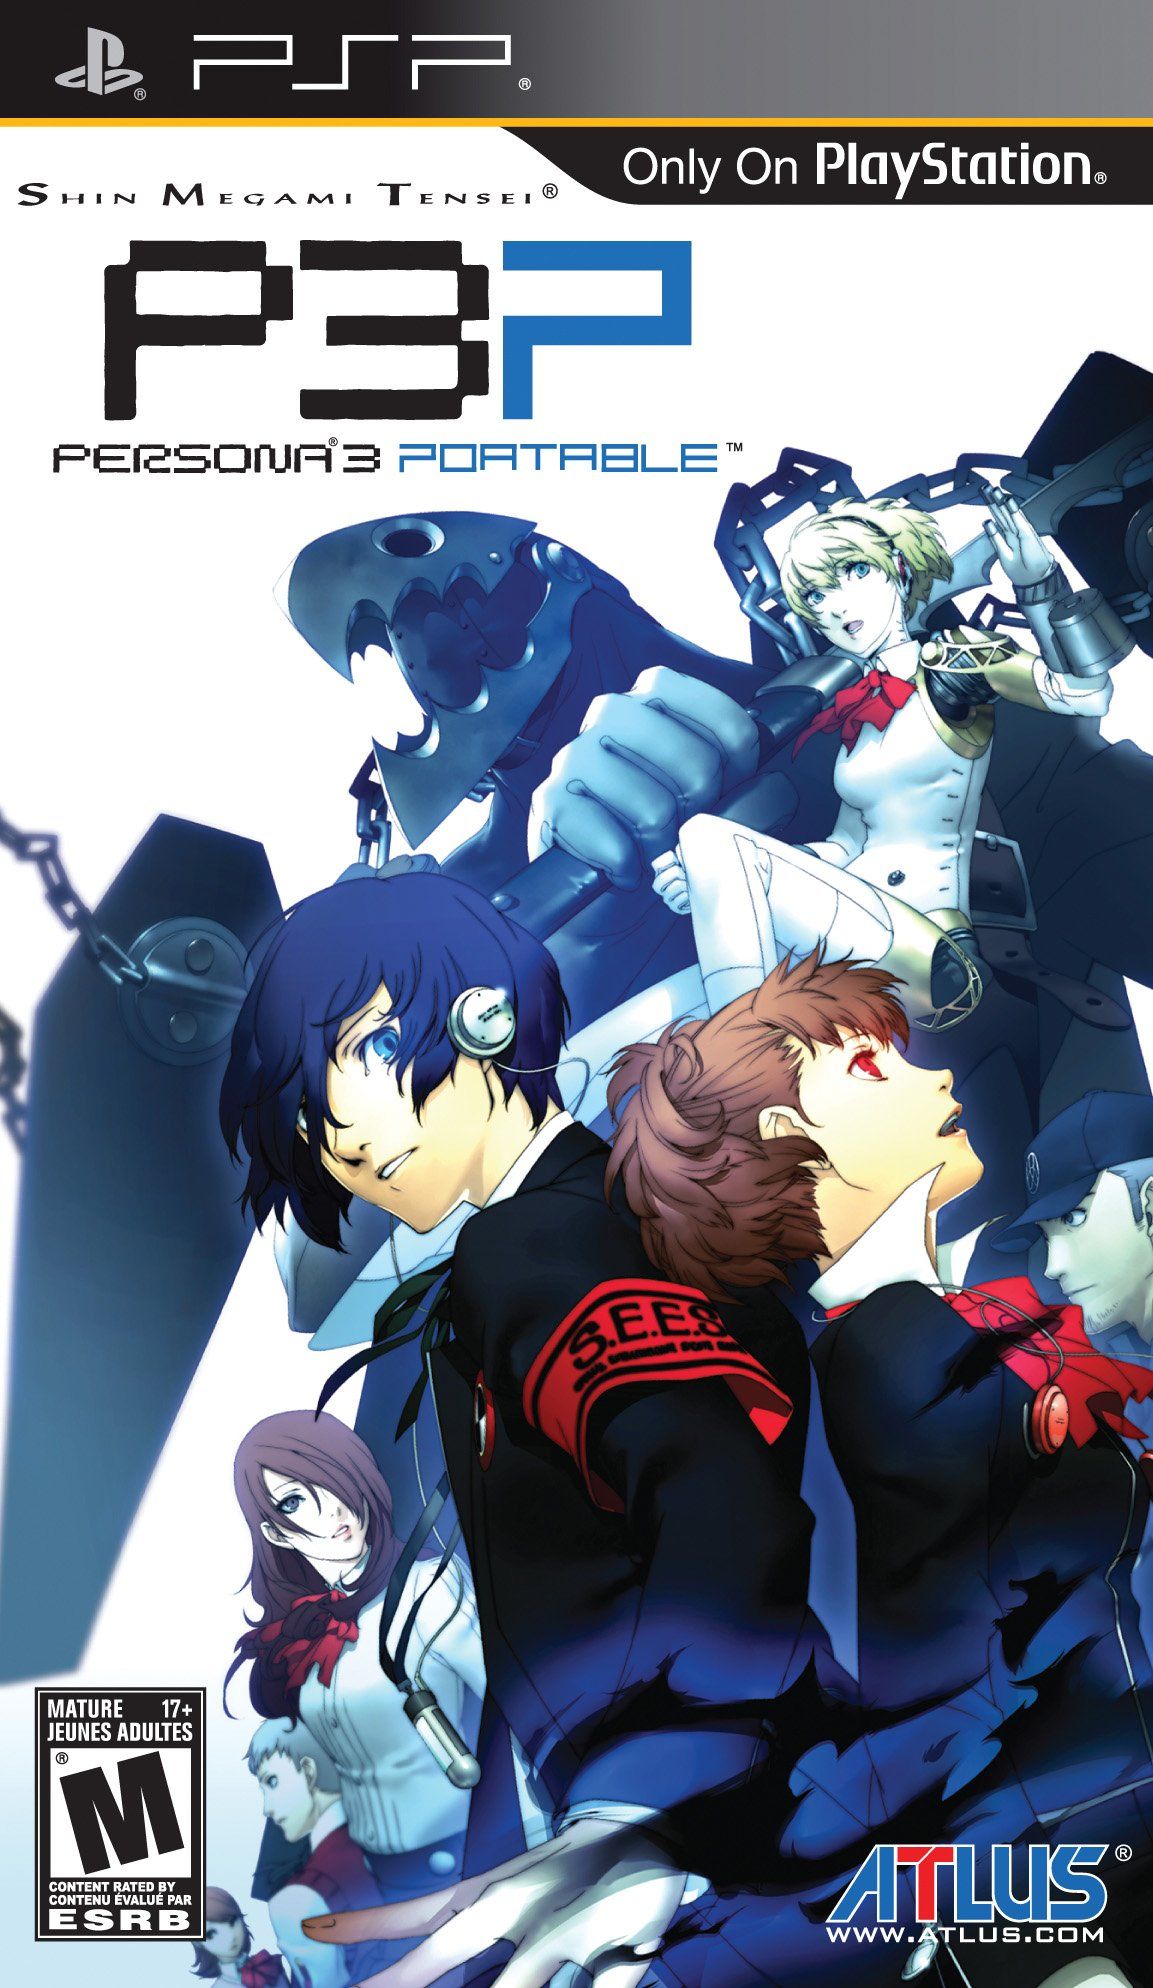 The protagonists and other characters on the cover of Persona 3 Portable